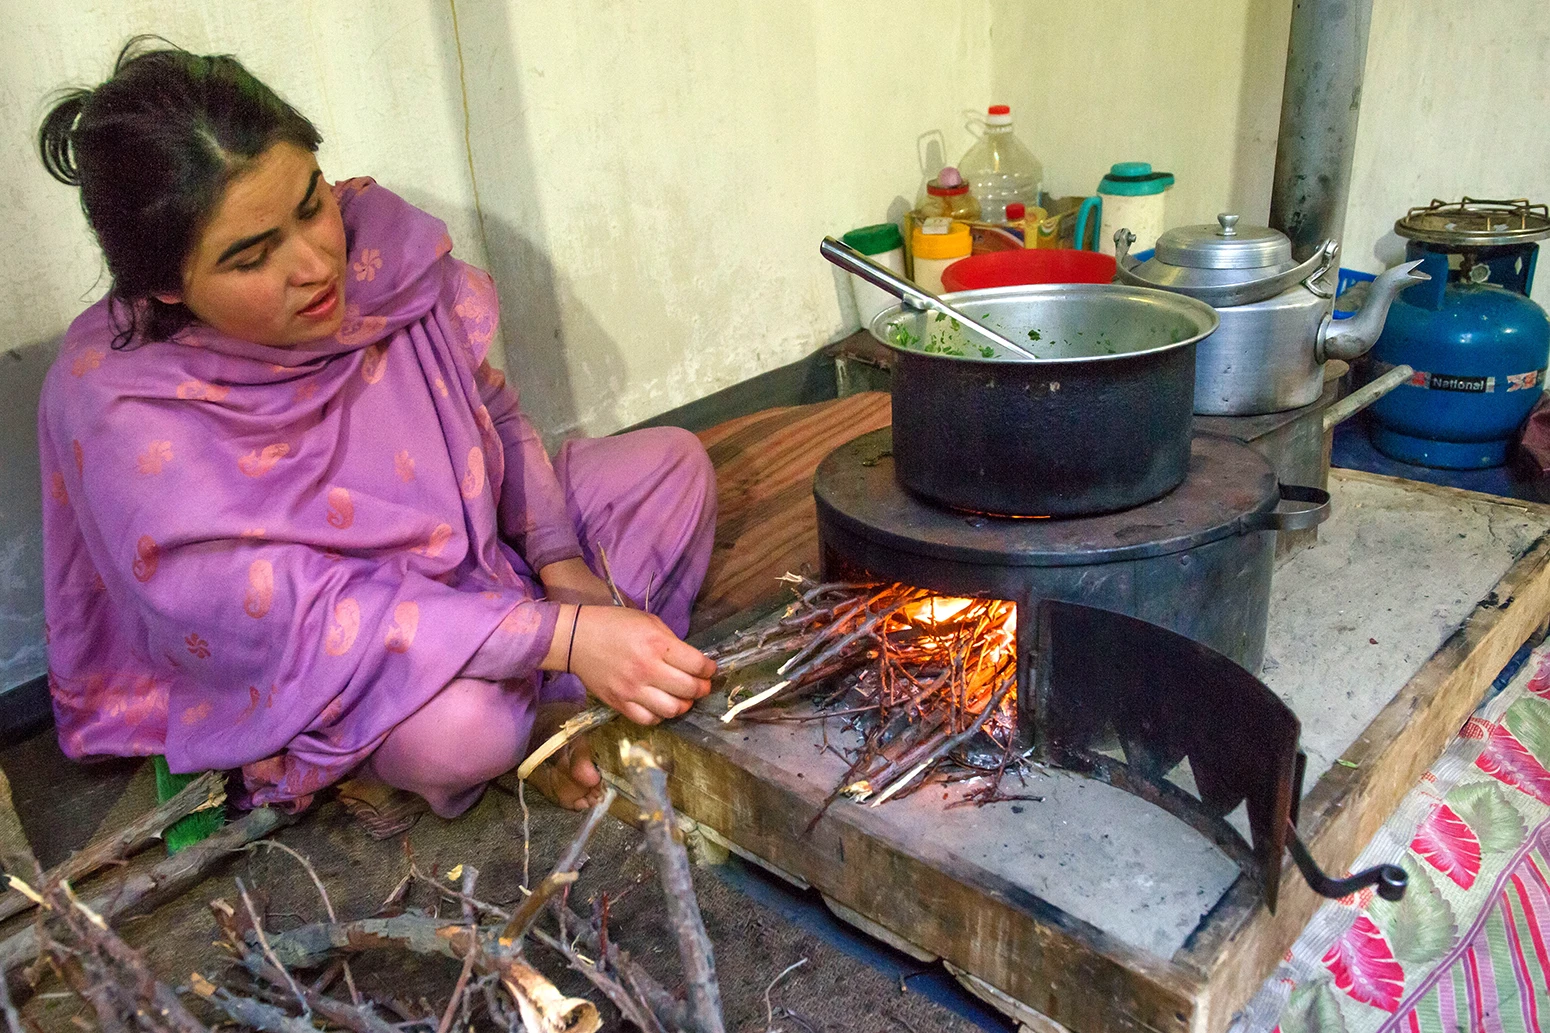 A woman cooks on a fire inside her house in Gilgit-Baltistan, Pakistan.